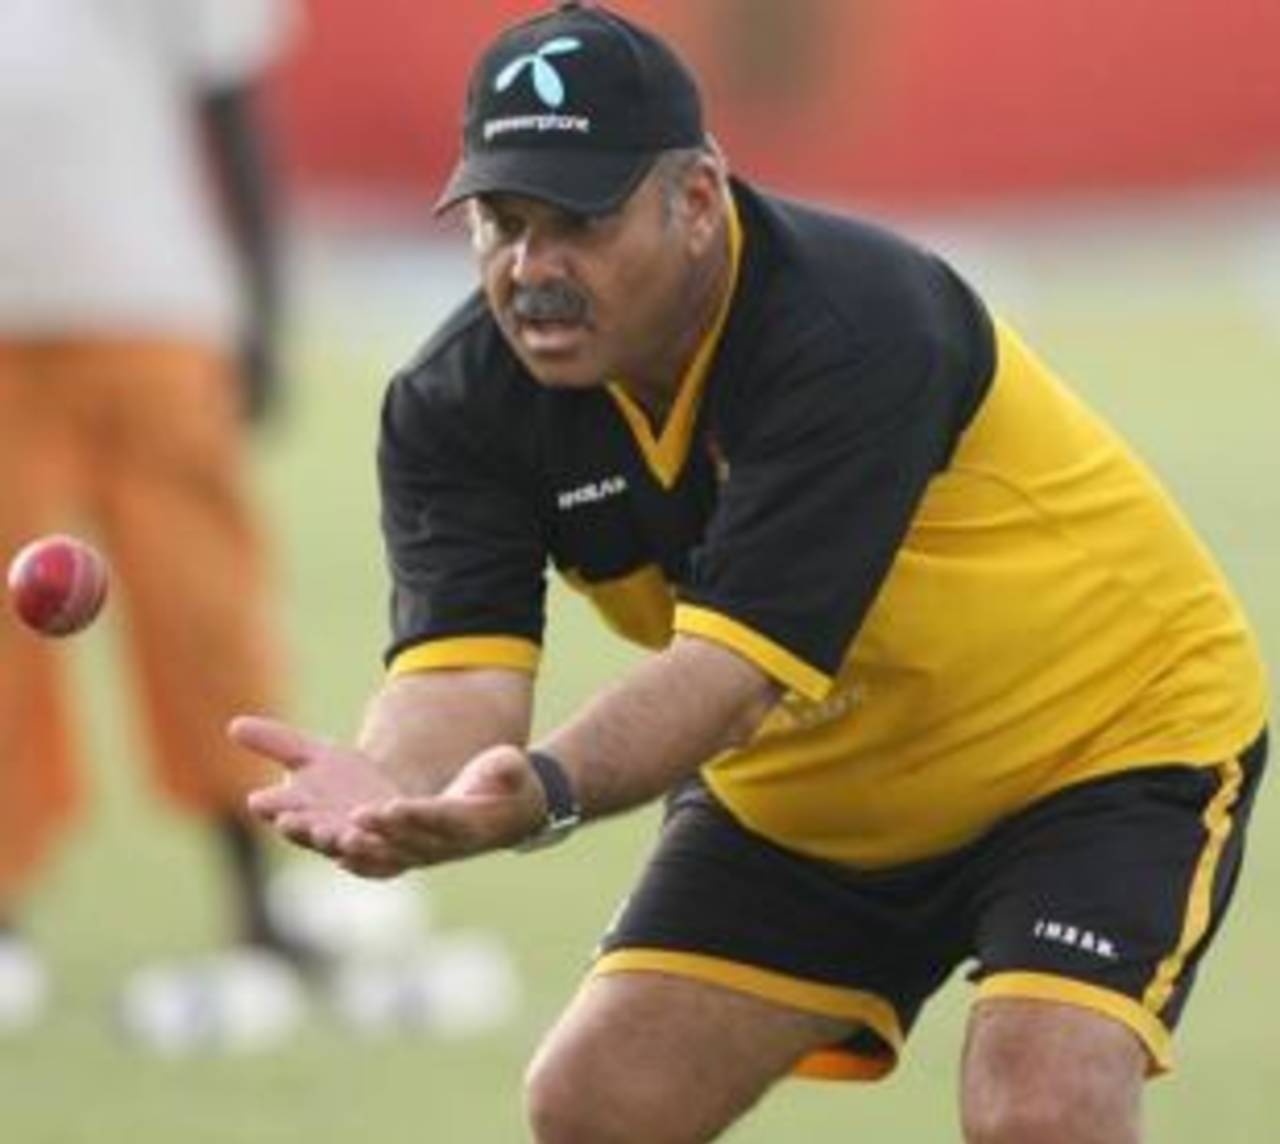 Dav Whatmore takes part in a fielding drill, Chittagong, May 16, 2007